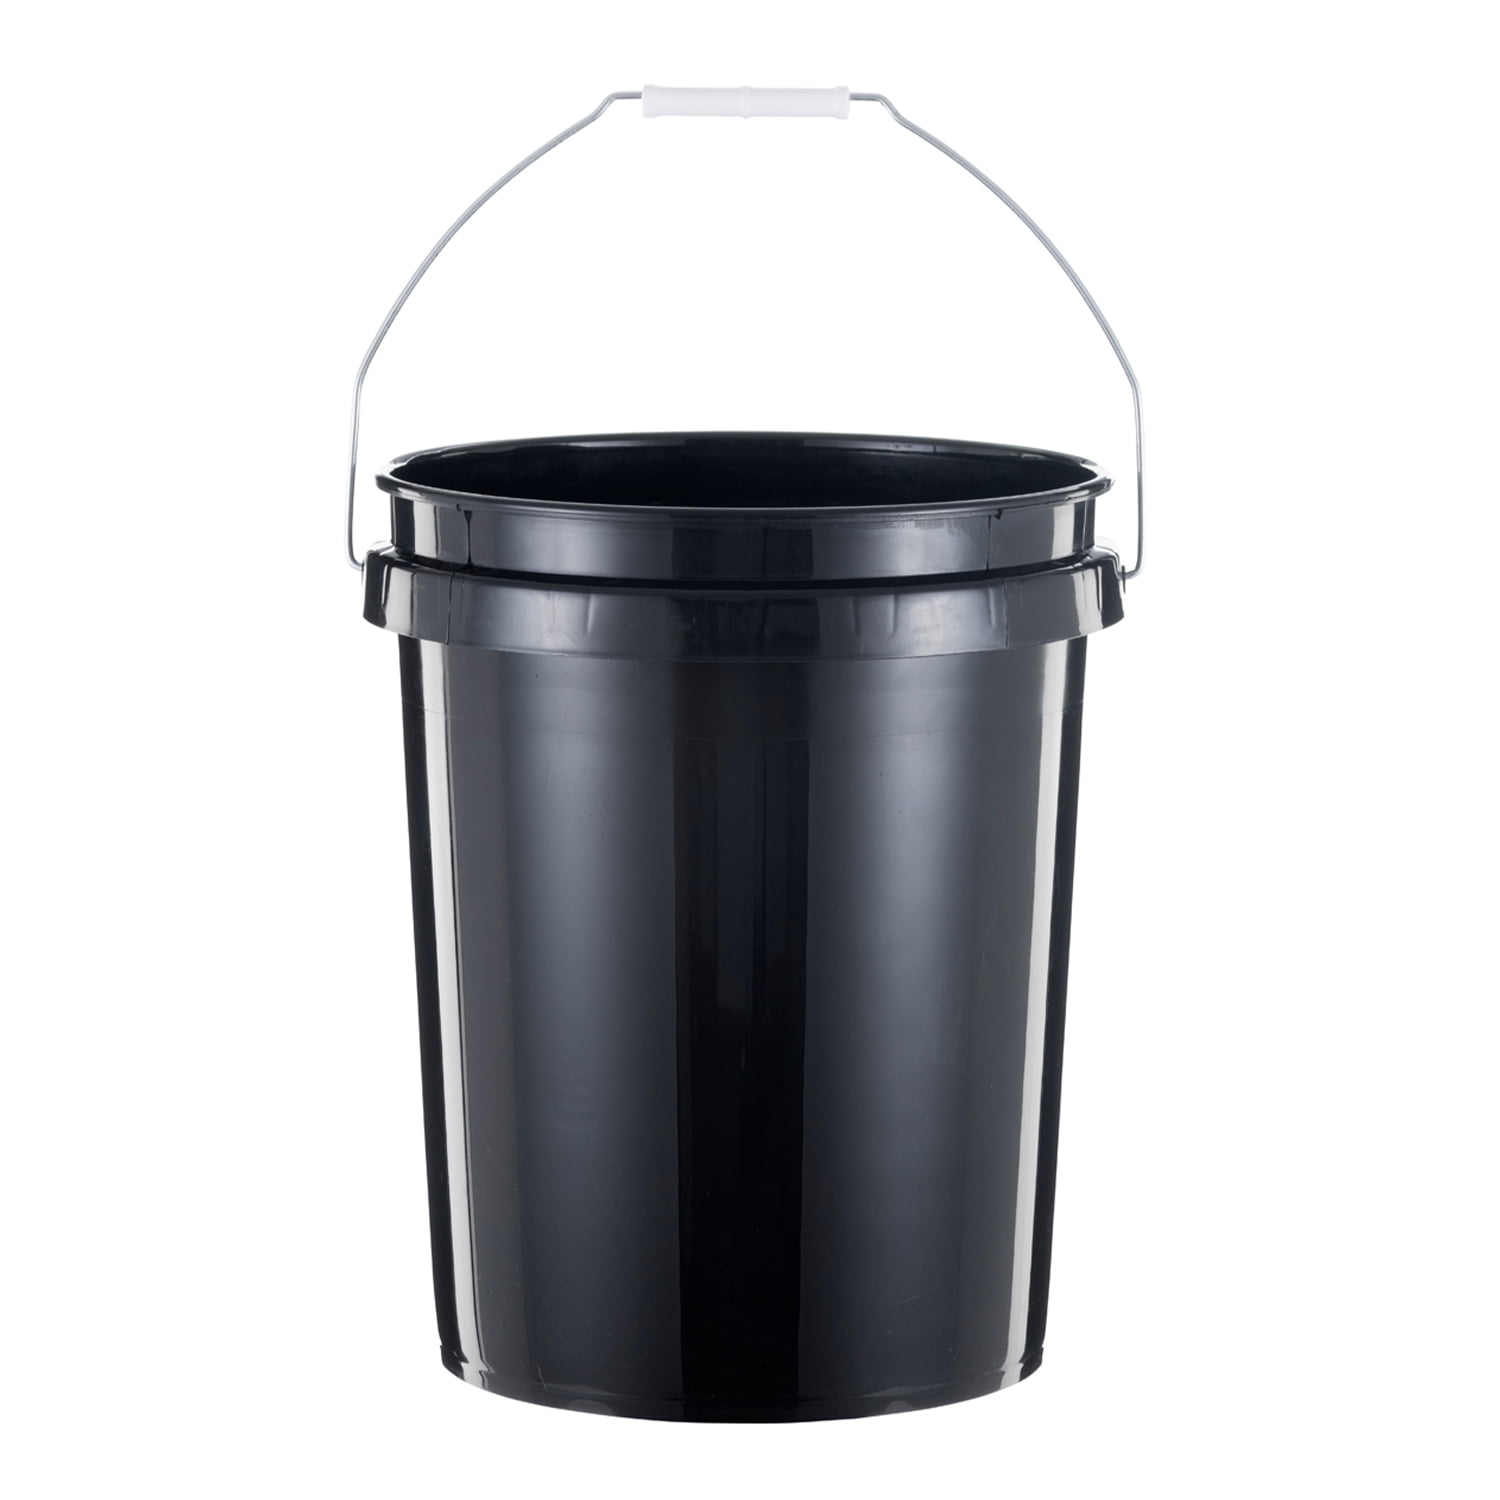 Bucket Lid Seat: Plastic, Black, For Use With 3-1/2 or 5 gal Buckets